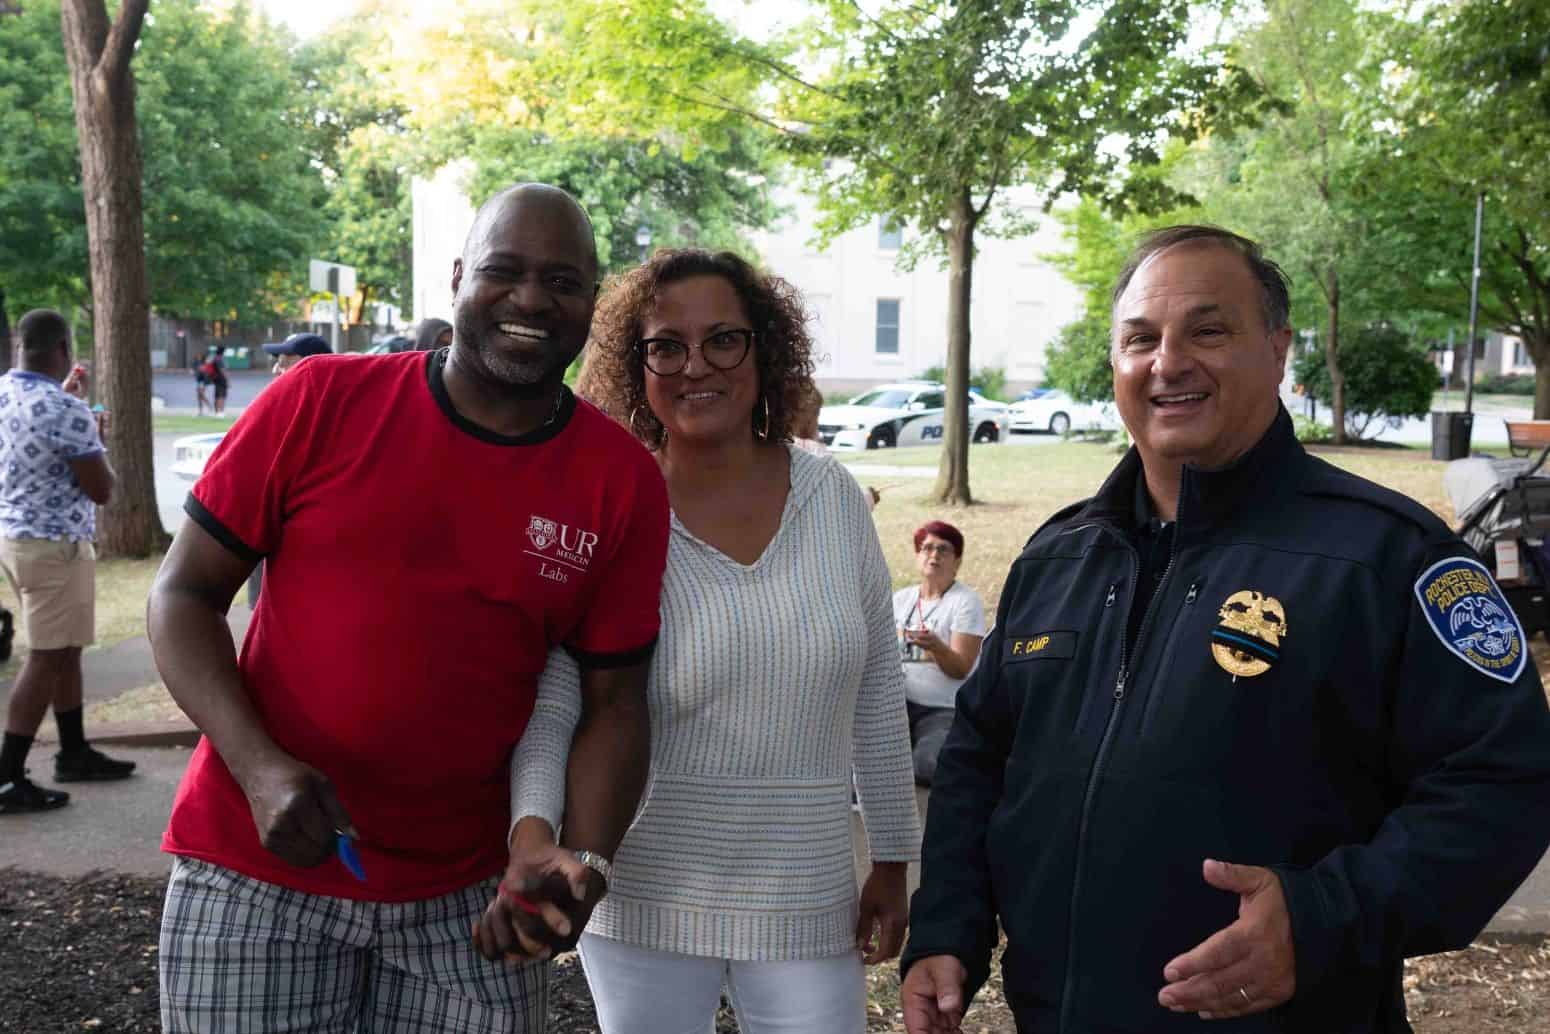 2022 corn hill rochester ny national night out ice cream social 39